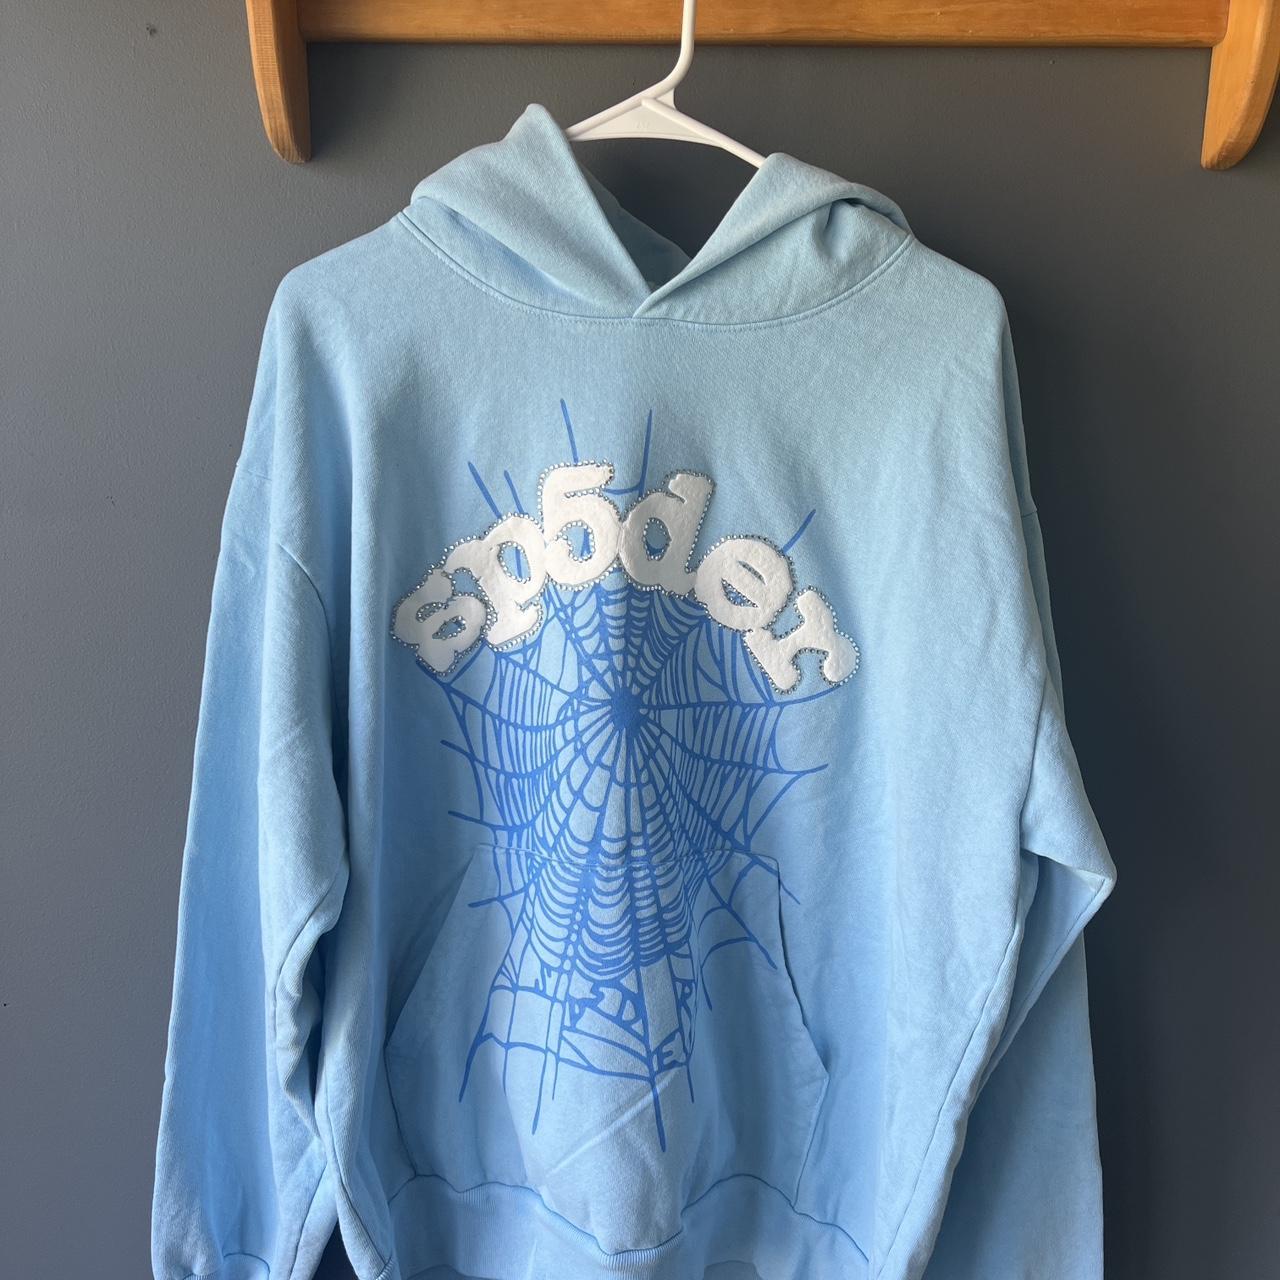 SP5DER Web Hoodie “Sky Blue” - Brand New - Purchased...